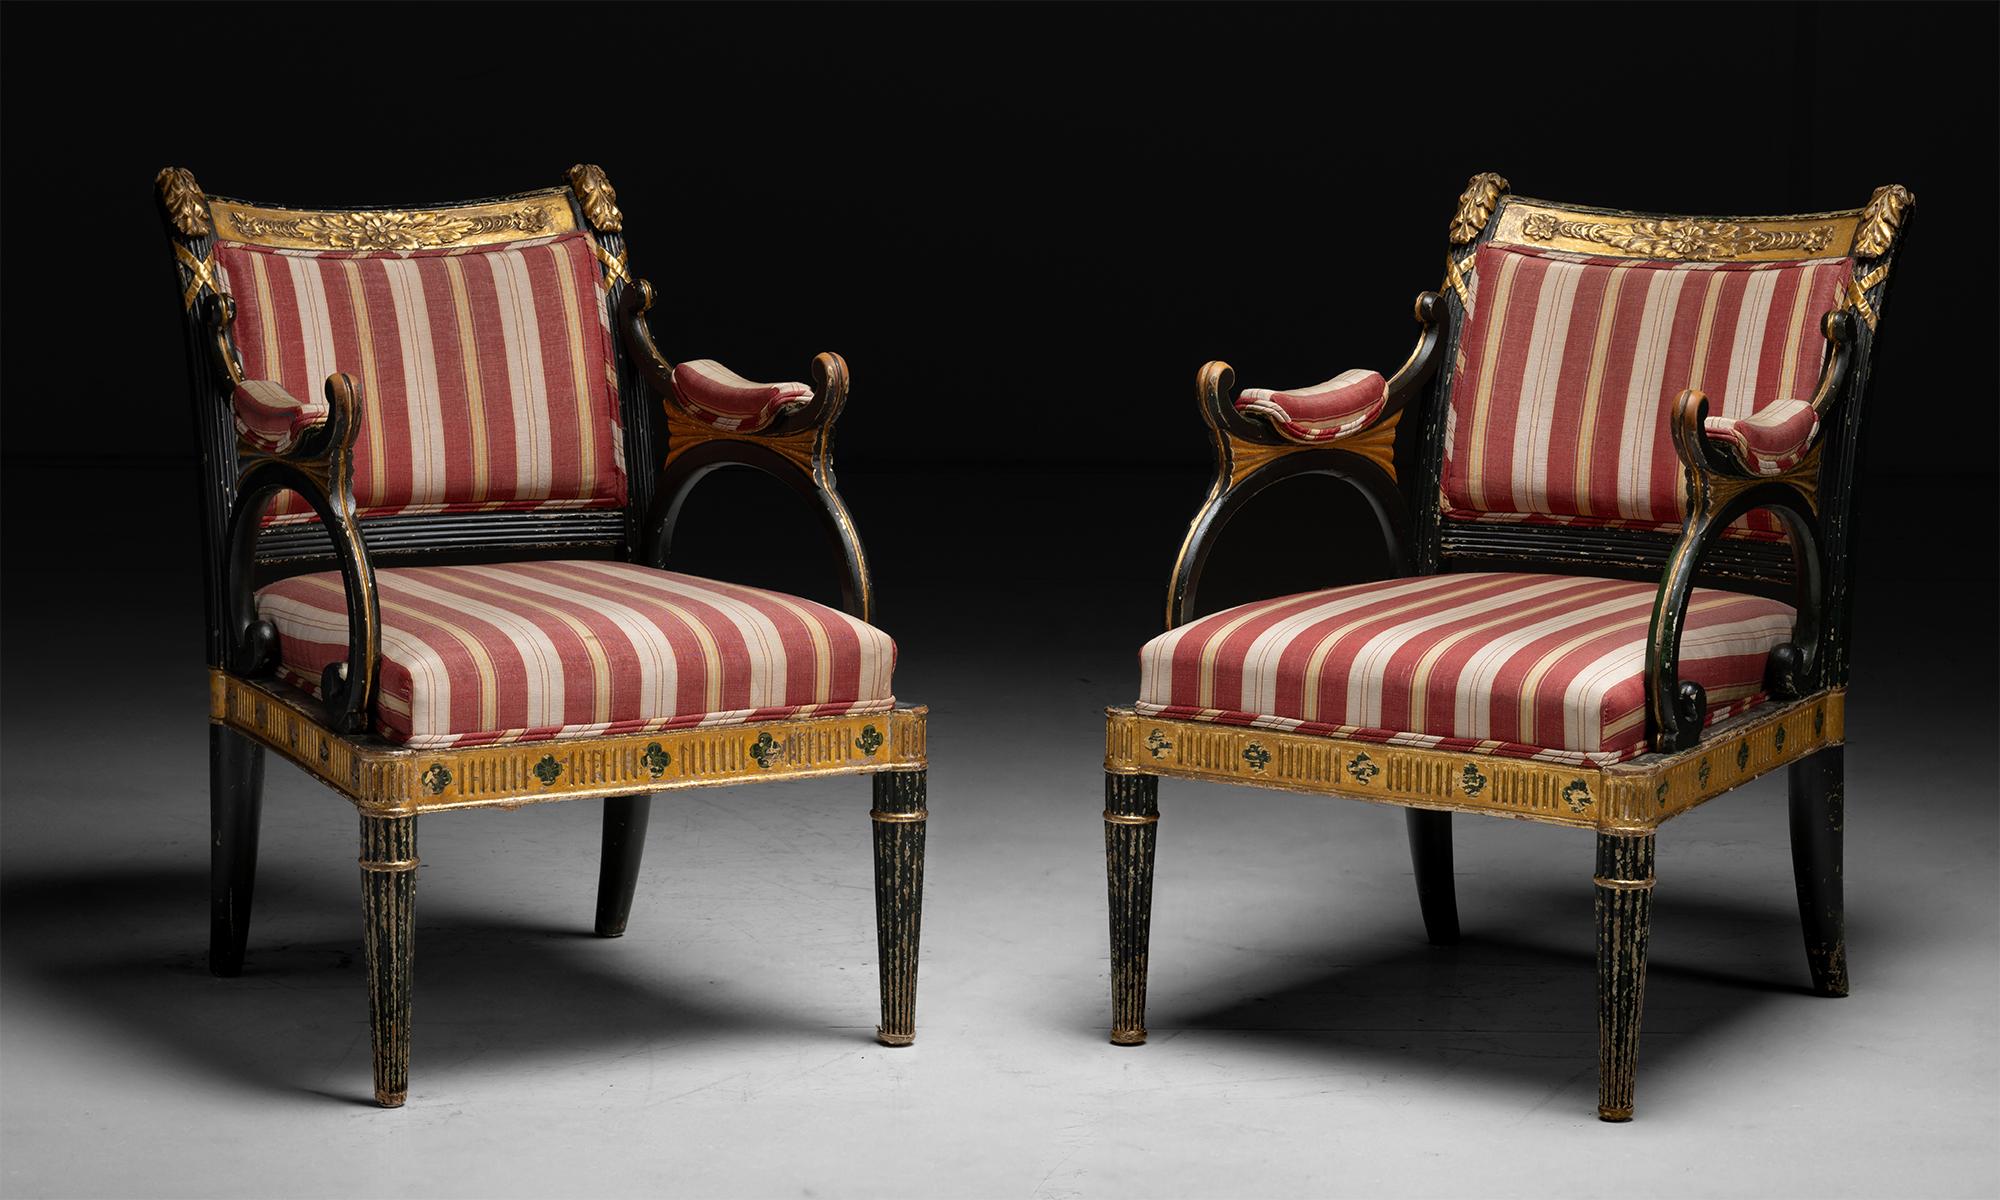 Regency Armchairs

England circa 1830

Painted gilt armchairs with detailed carving, original upholstery.

24